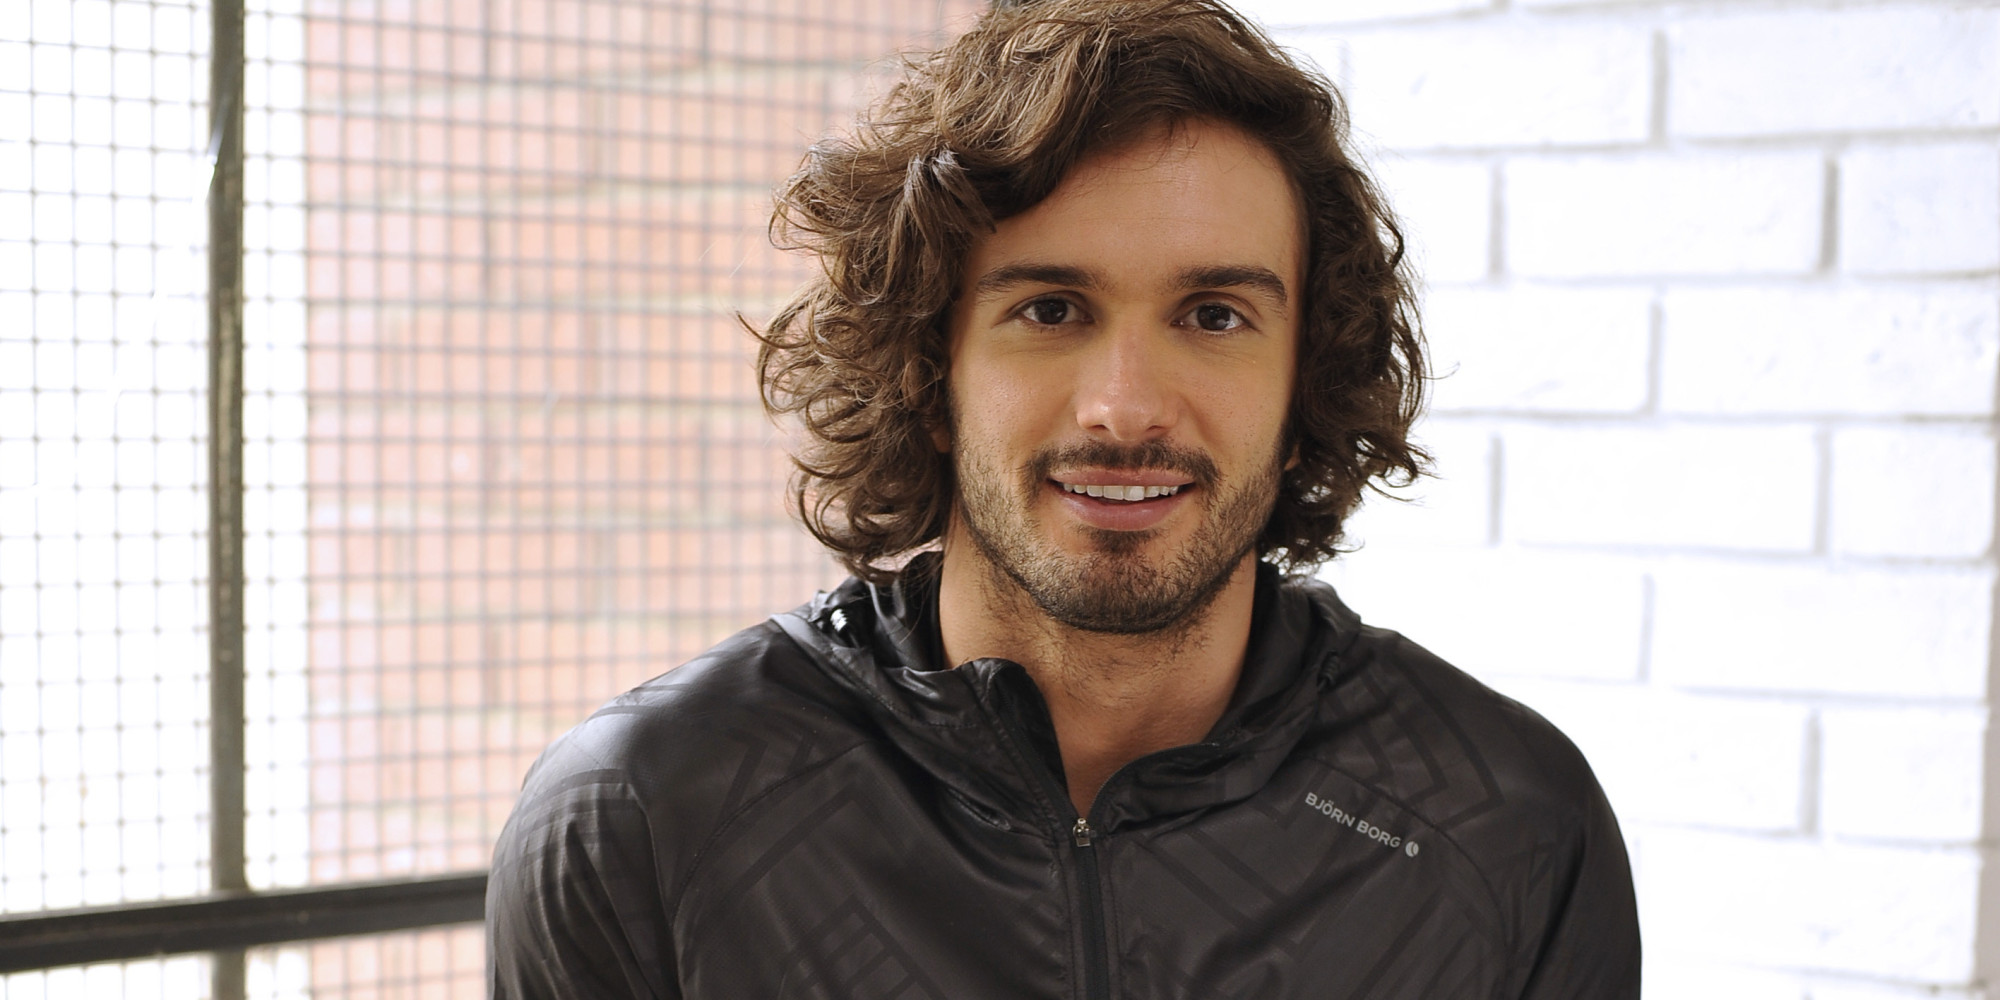 joe-wicks-on-his-90-day-sss-diet-plan-and-how-it-transforms-clients